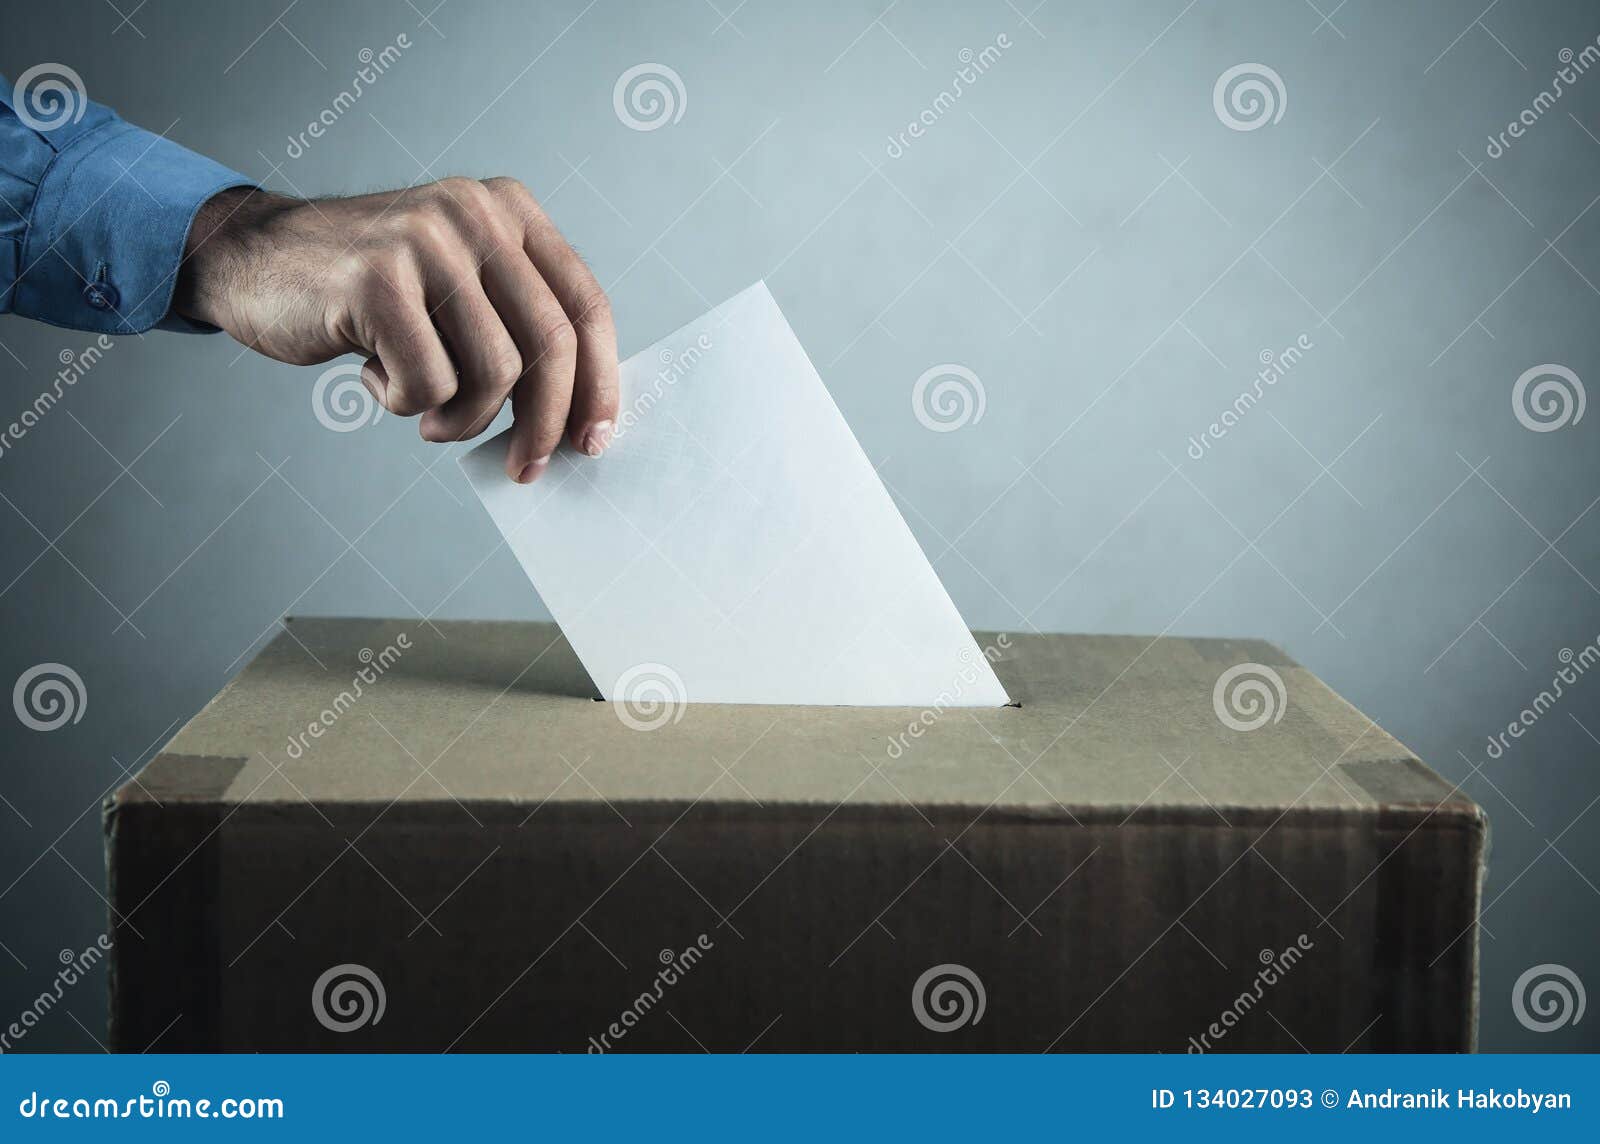 voting at the ballot box. election and democracy concept